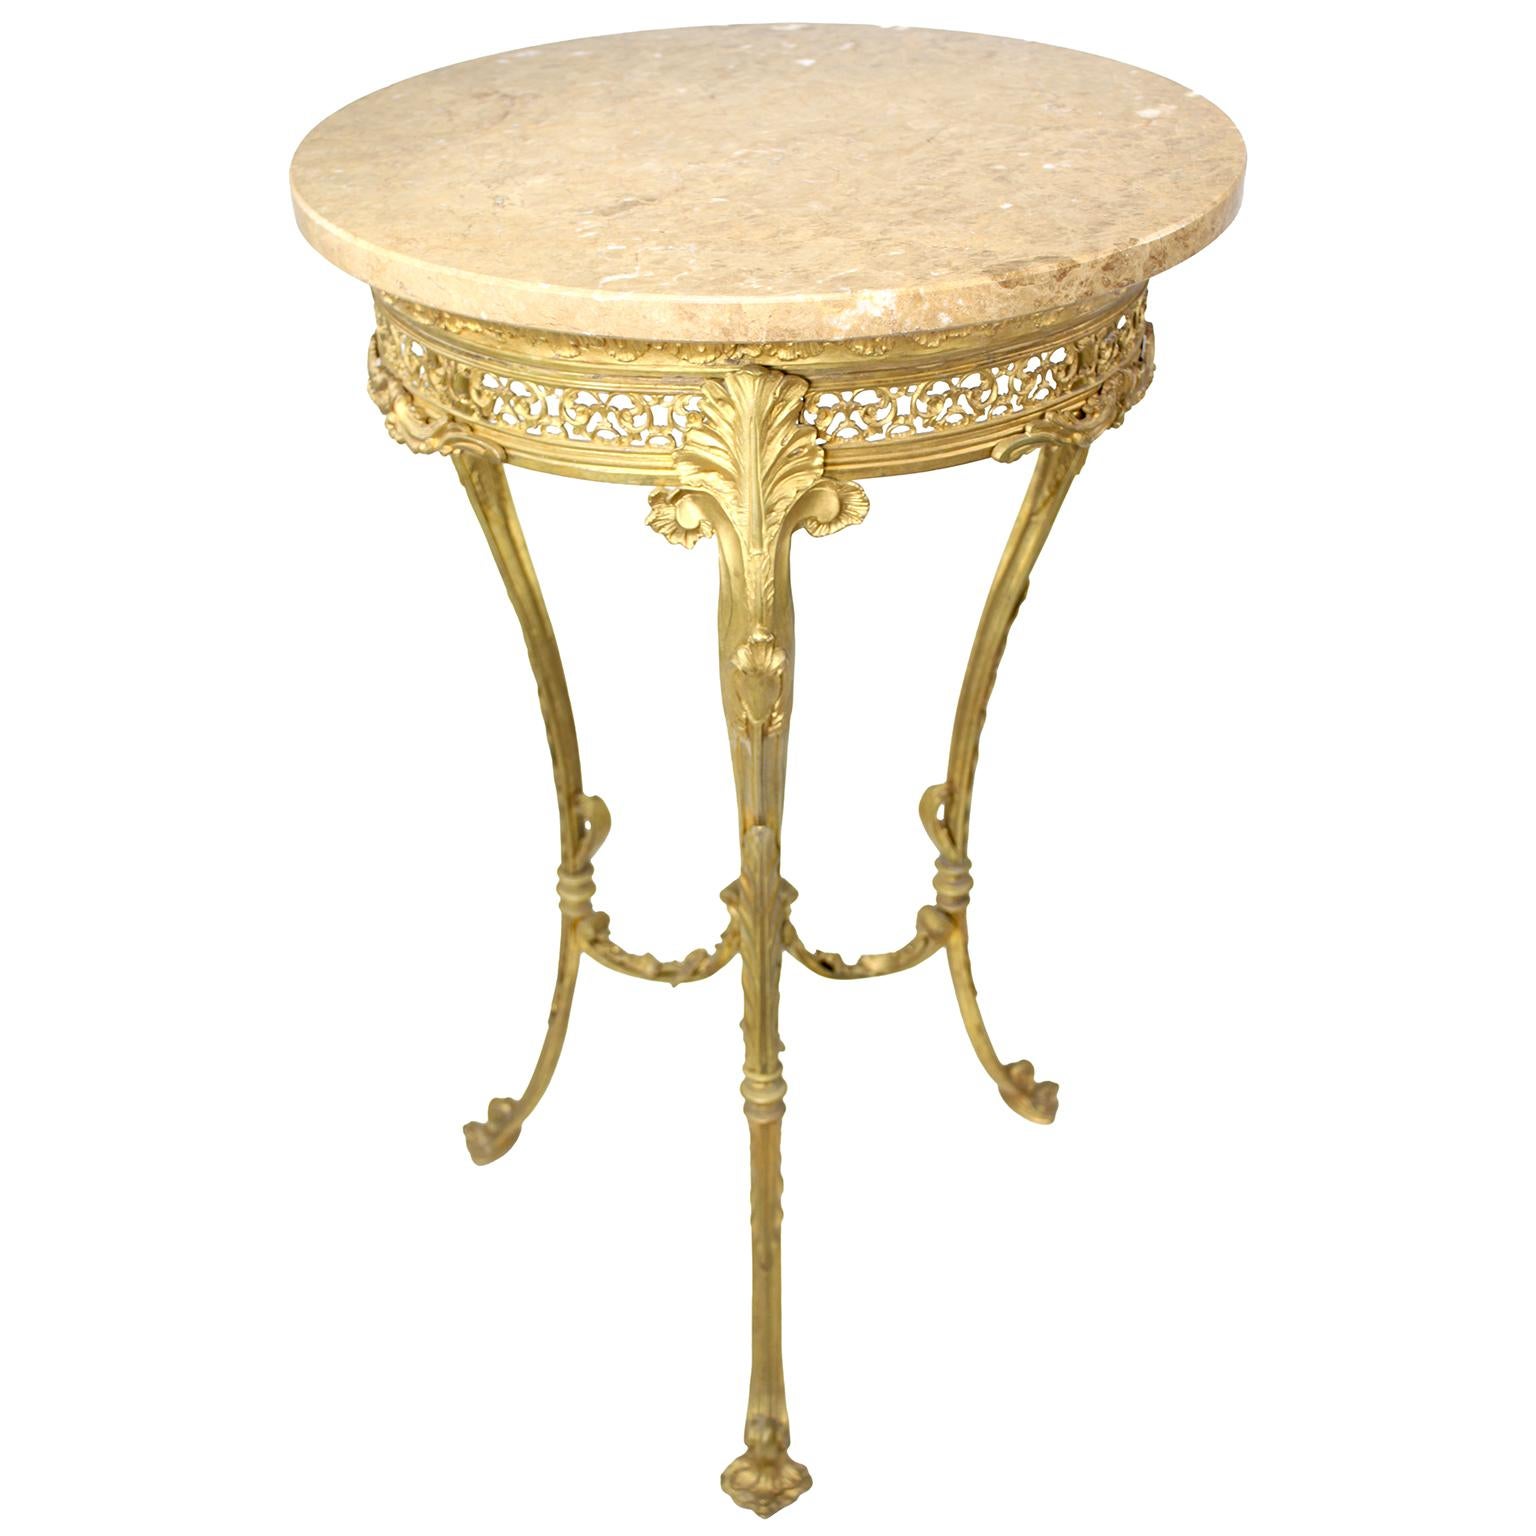 A French Belle Époque Louis XV Style Gilt-Bronze Gueridon Table with Marble Top, in the manner of Zwiener Jansen Successeur. The circular Riviera Beige marble top above a three-leg ormolu base with a pierced floral apron below an icicle trim,